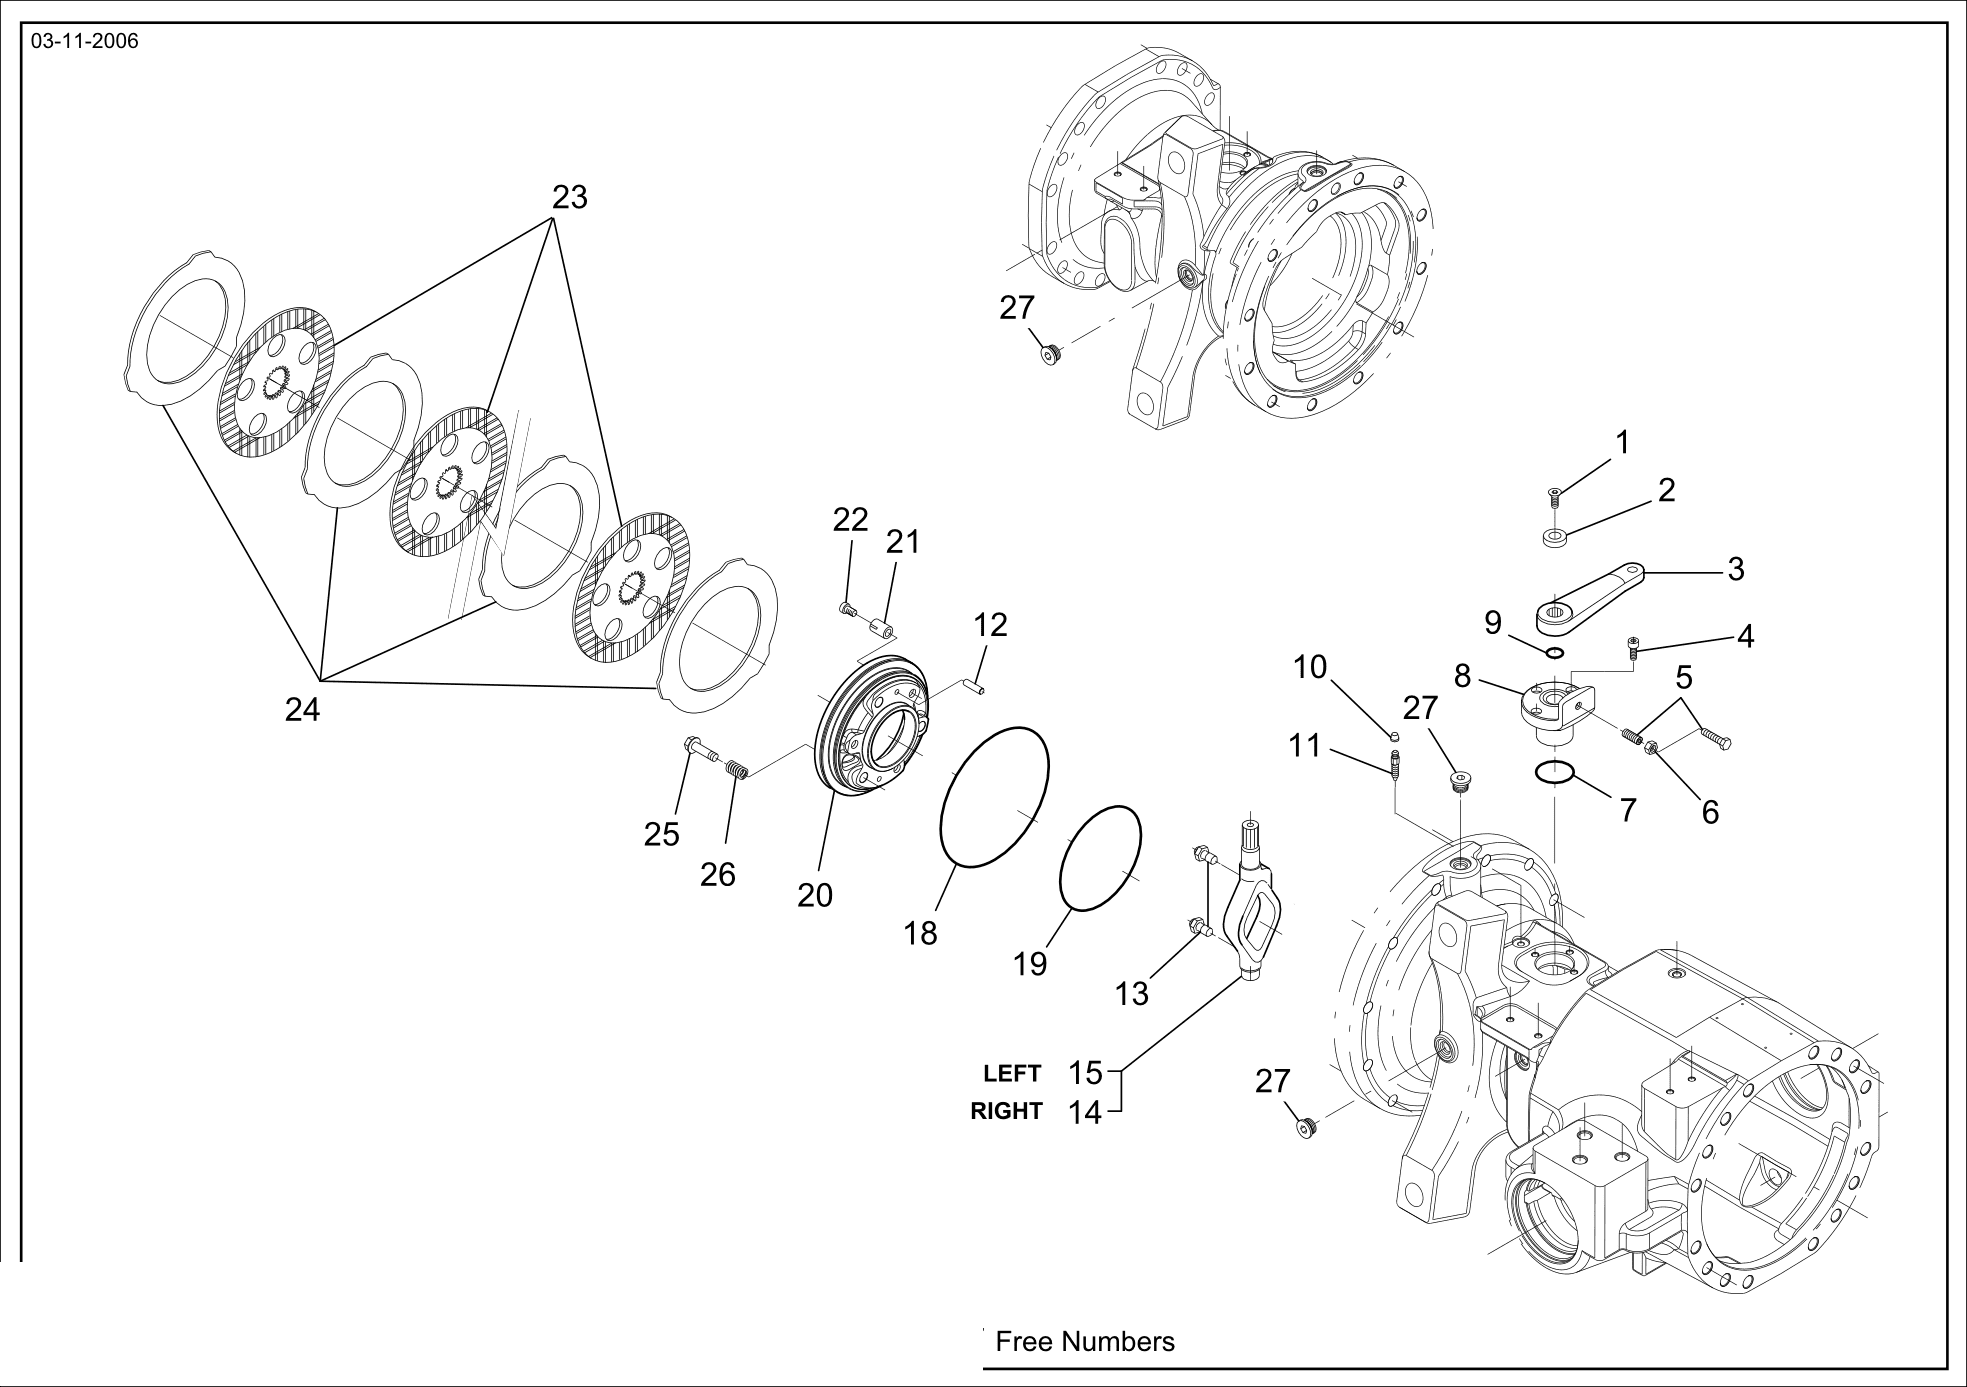 drawing for GHH 1202-0069 - LEVER (figure 5)